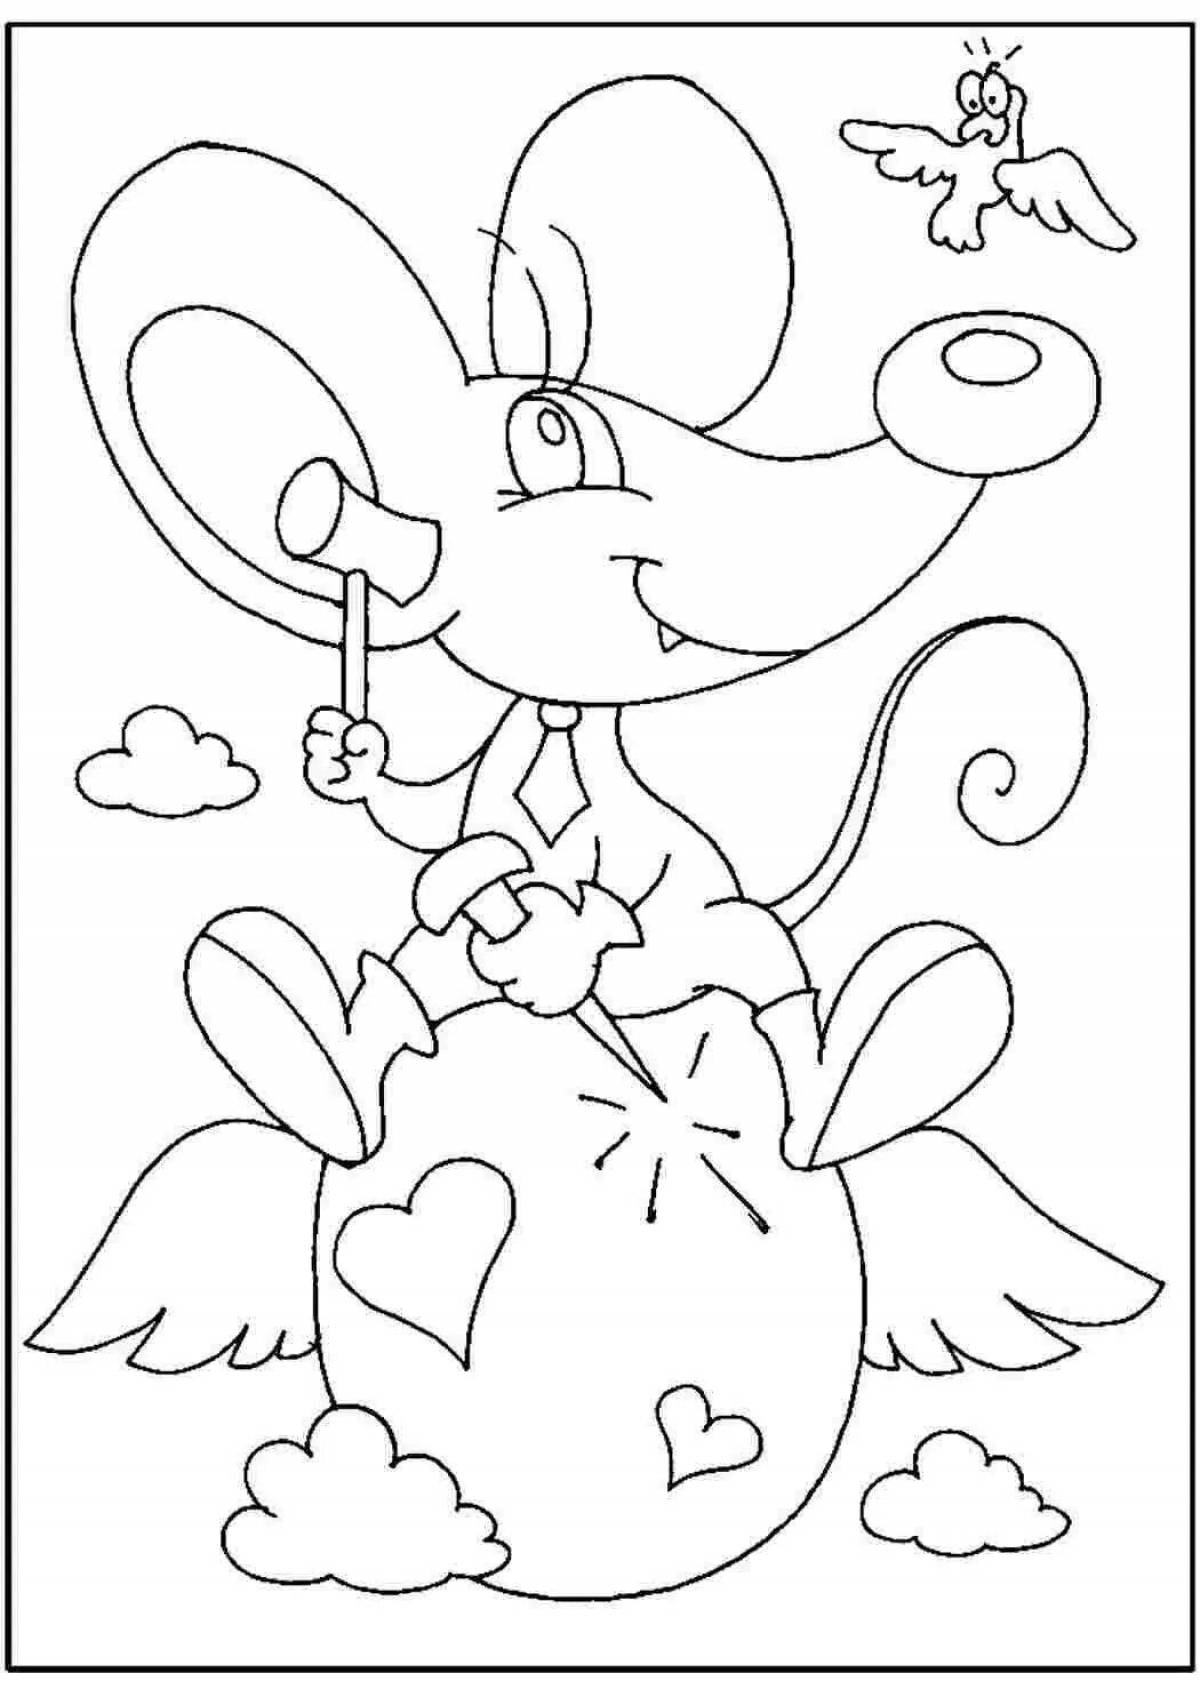 Fancy mouse norushka coloring book